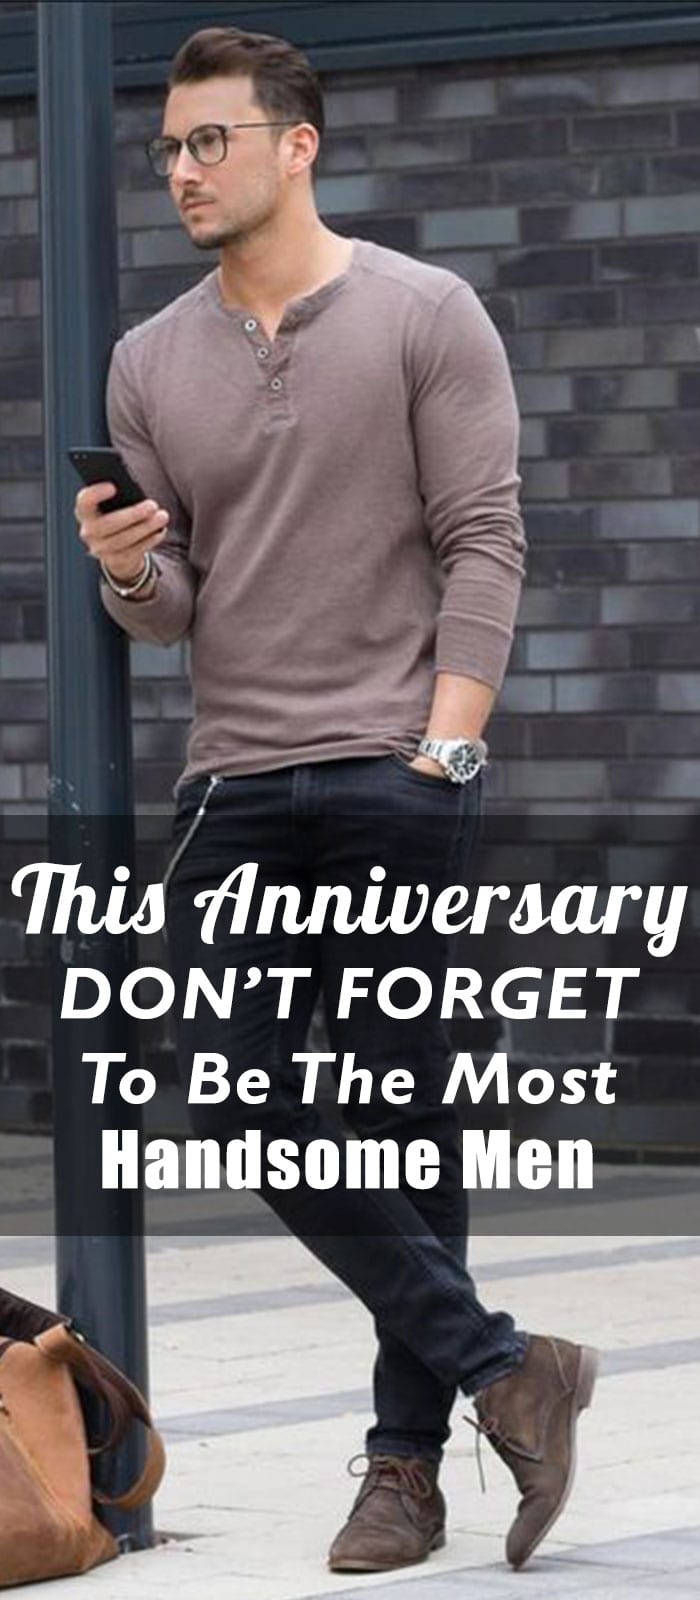 This Anniversary DON’T FORGET To Be The Most Handsome Men